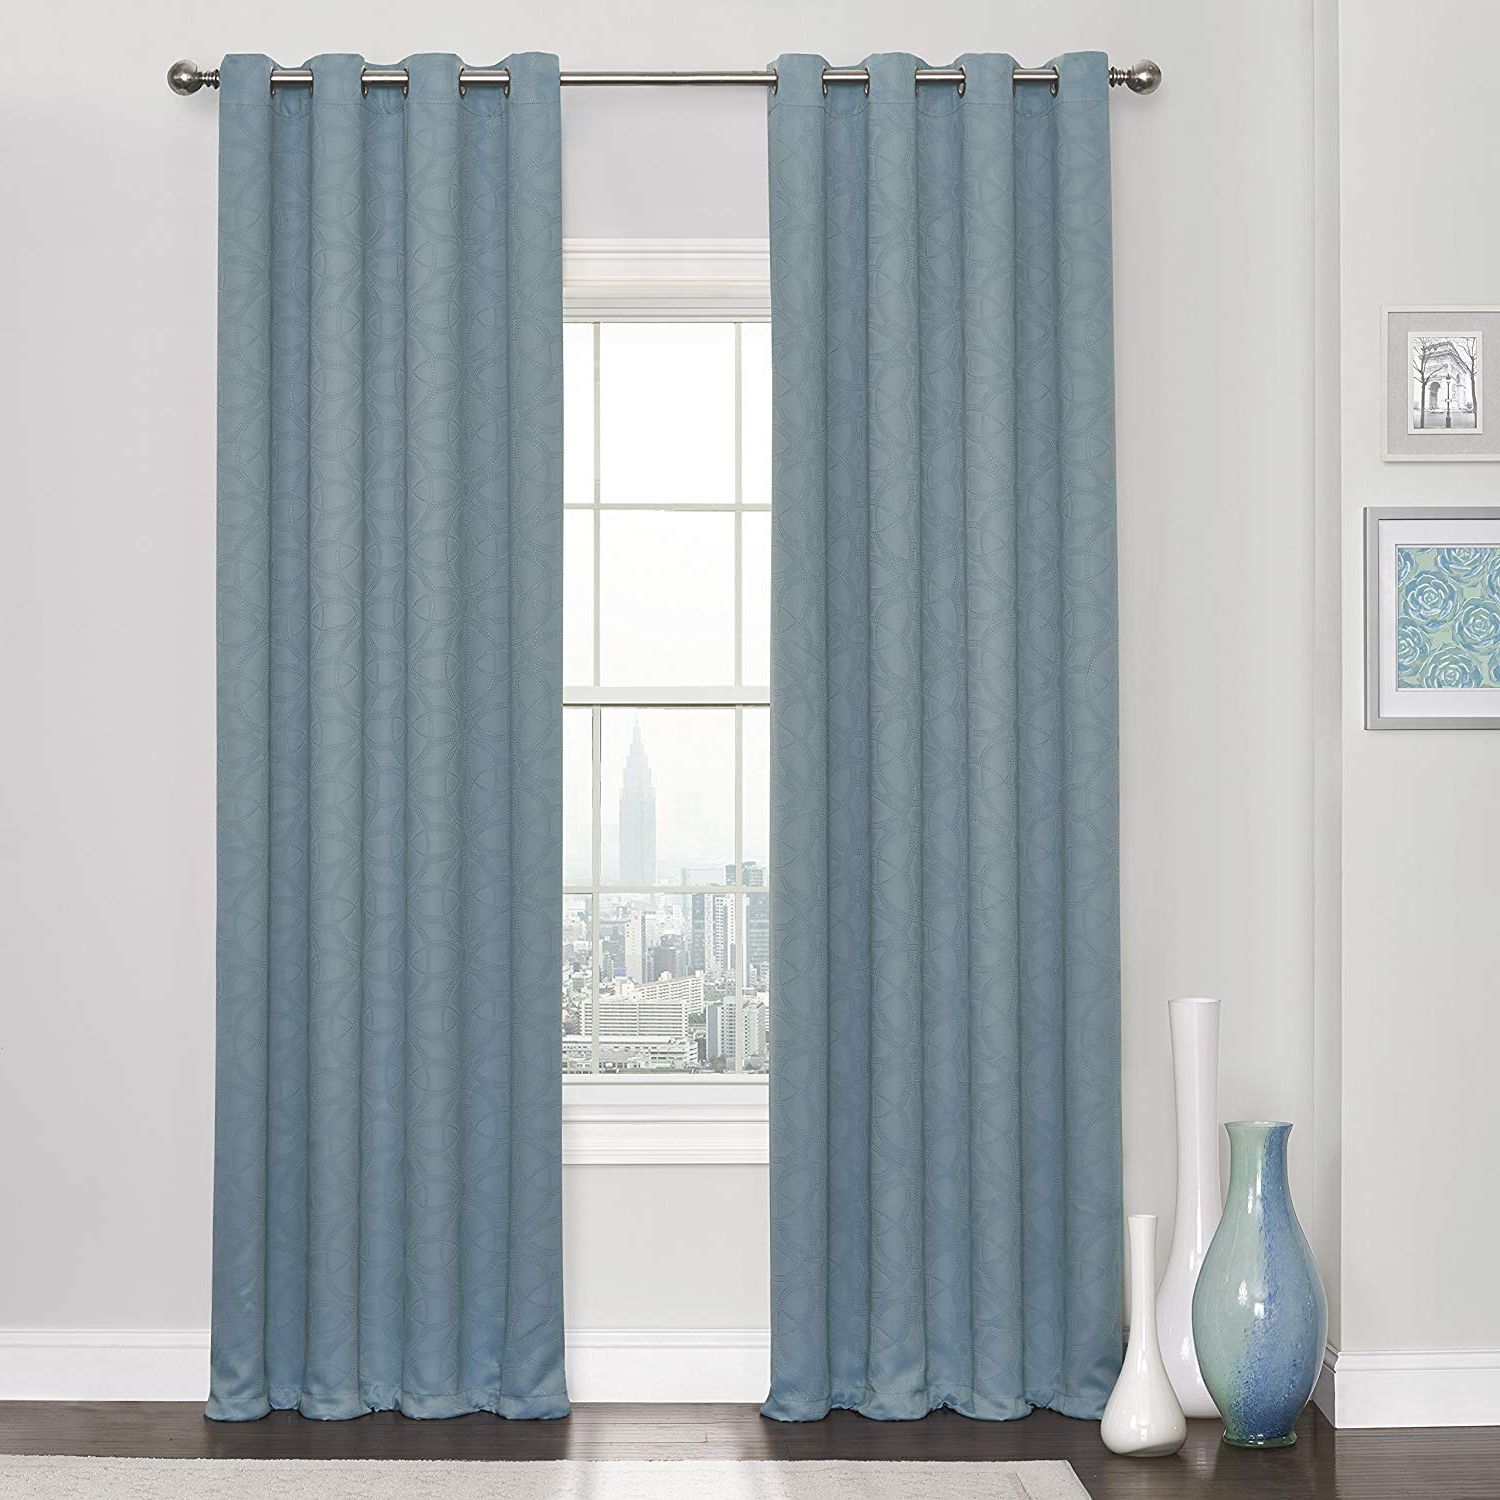 Well Known Eclipse Darrell Thermaweave Blackout Window Curtain Panels With Regard To Amazon: Eclipse 16911052108spa Thermaweave Blackout (View 8 of 20)